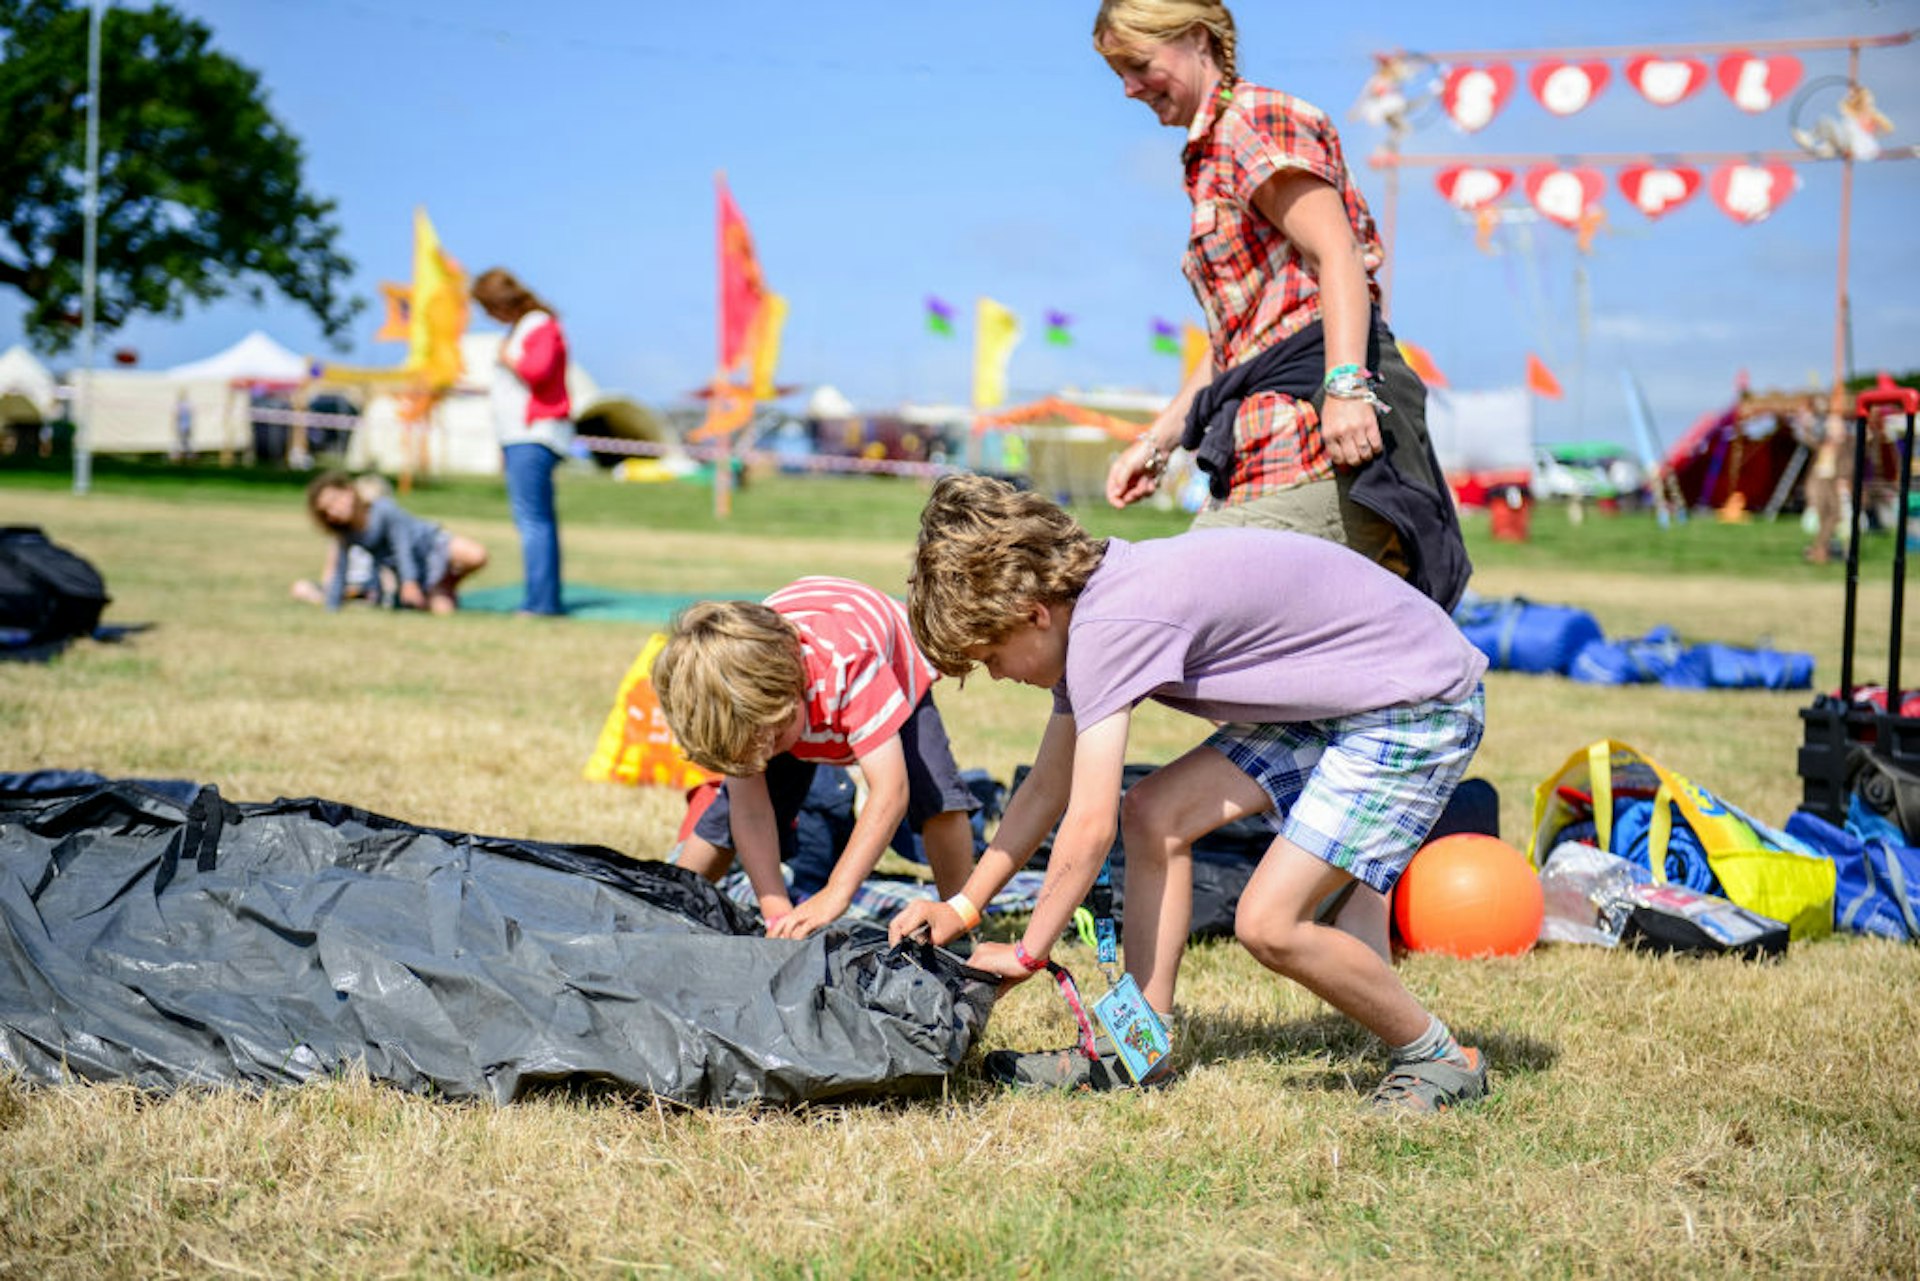  Festival goers set up in the campsite on the first day of Camp Bestival